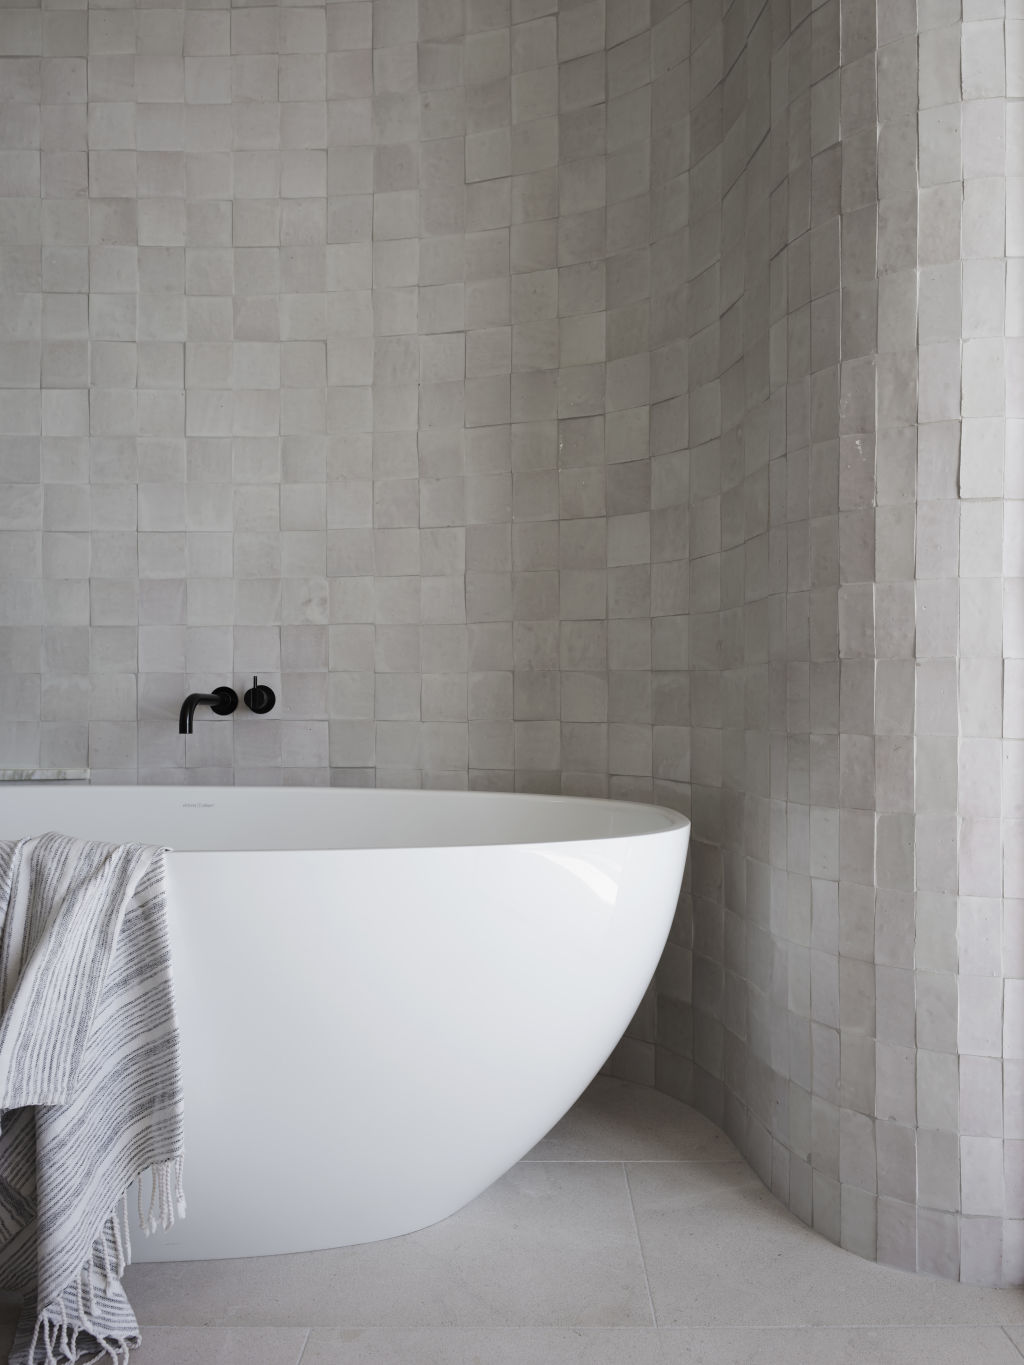 A bath is always a feature that should demand attention. Photo: Anson Smart